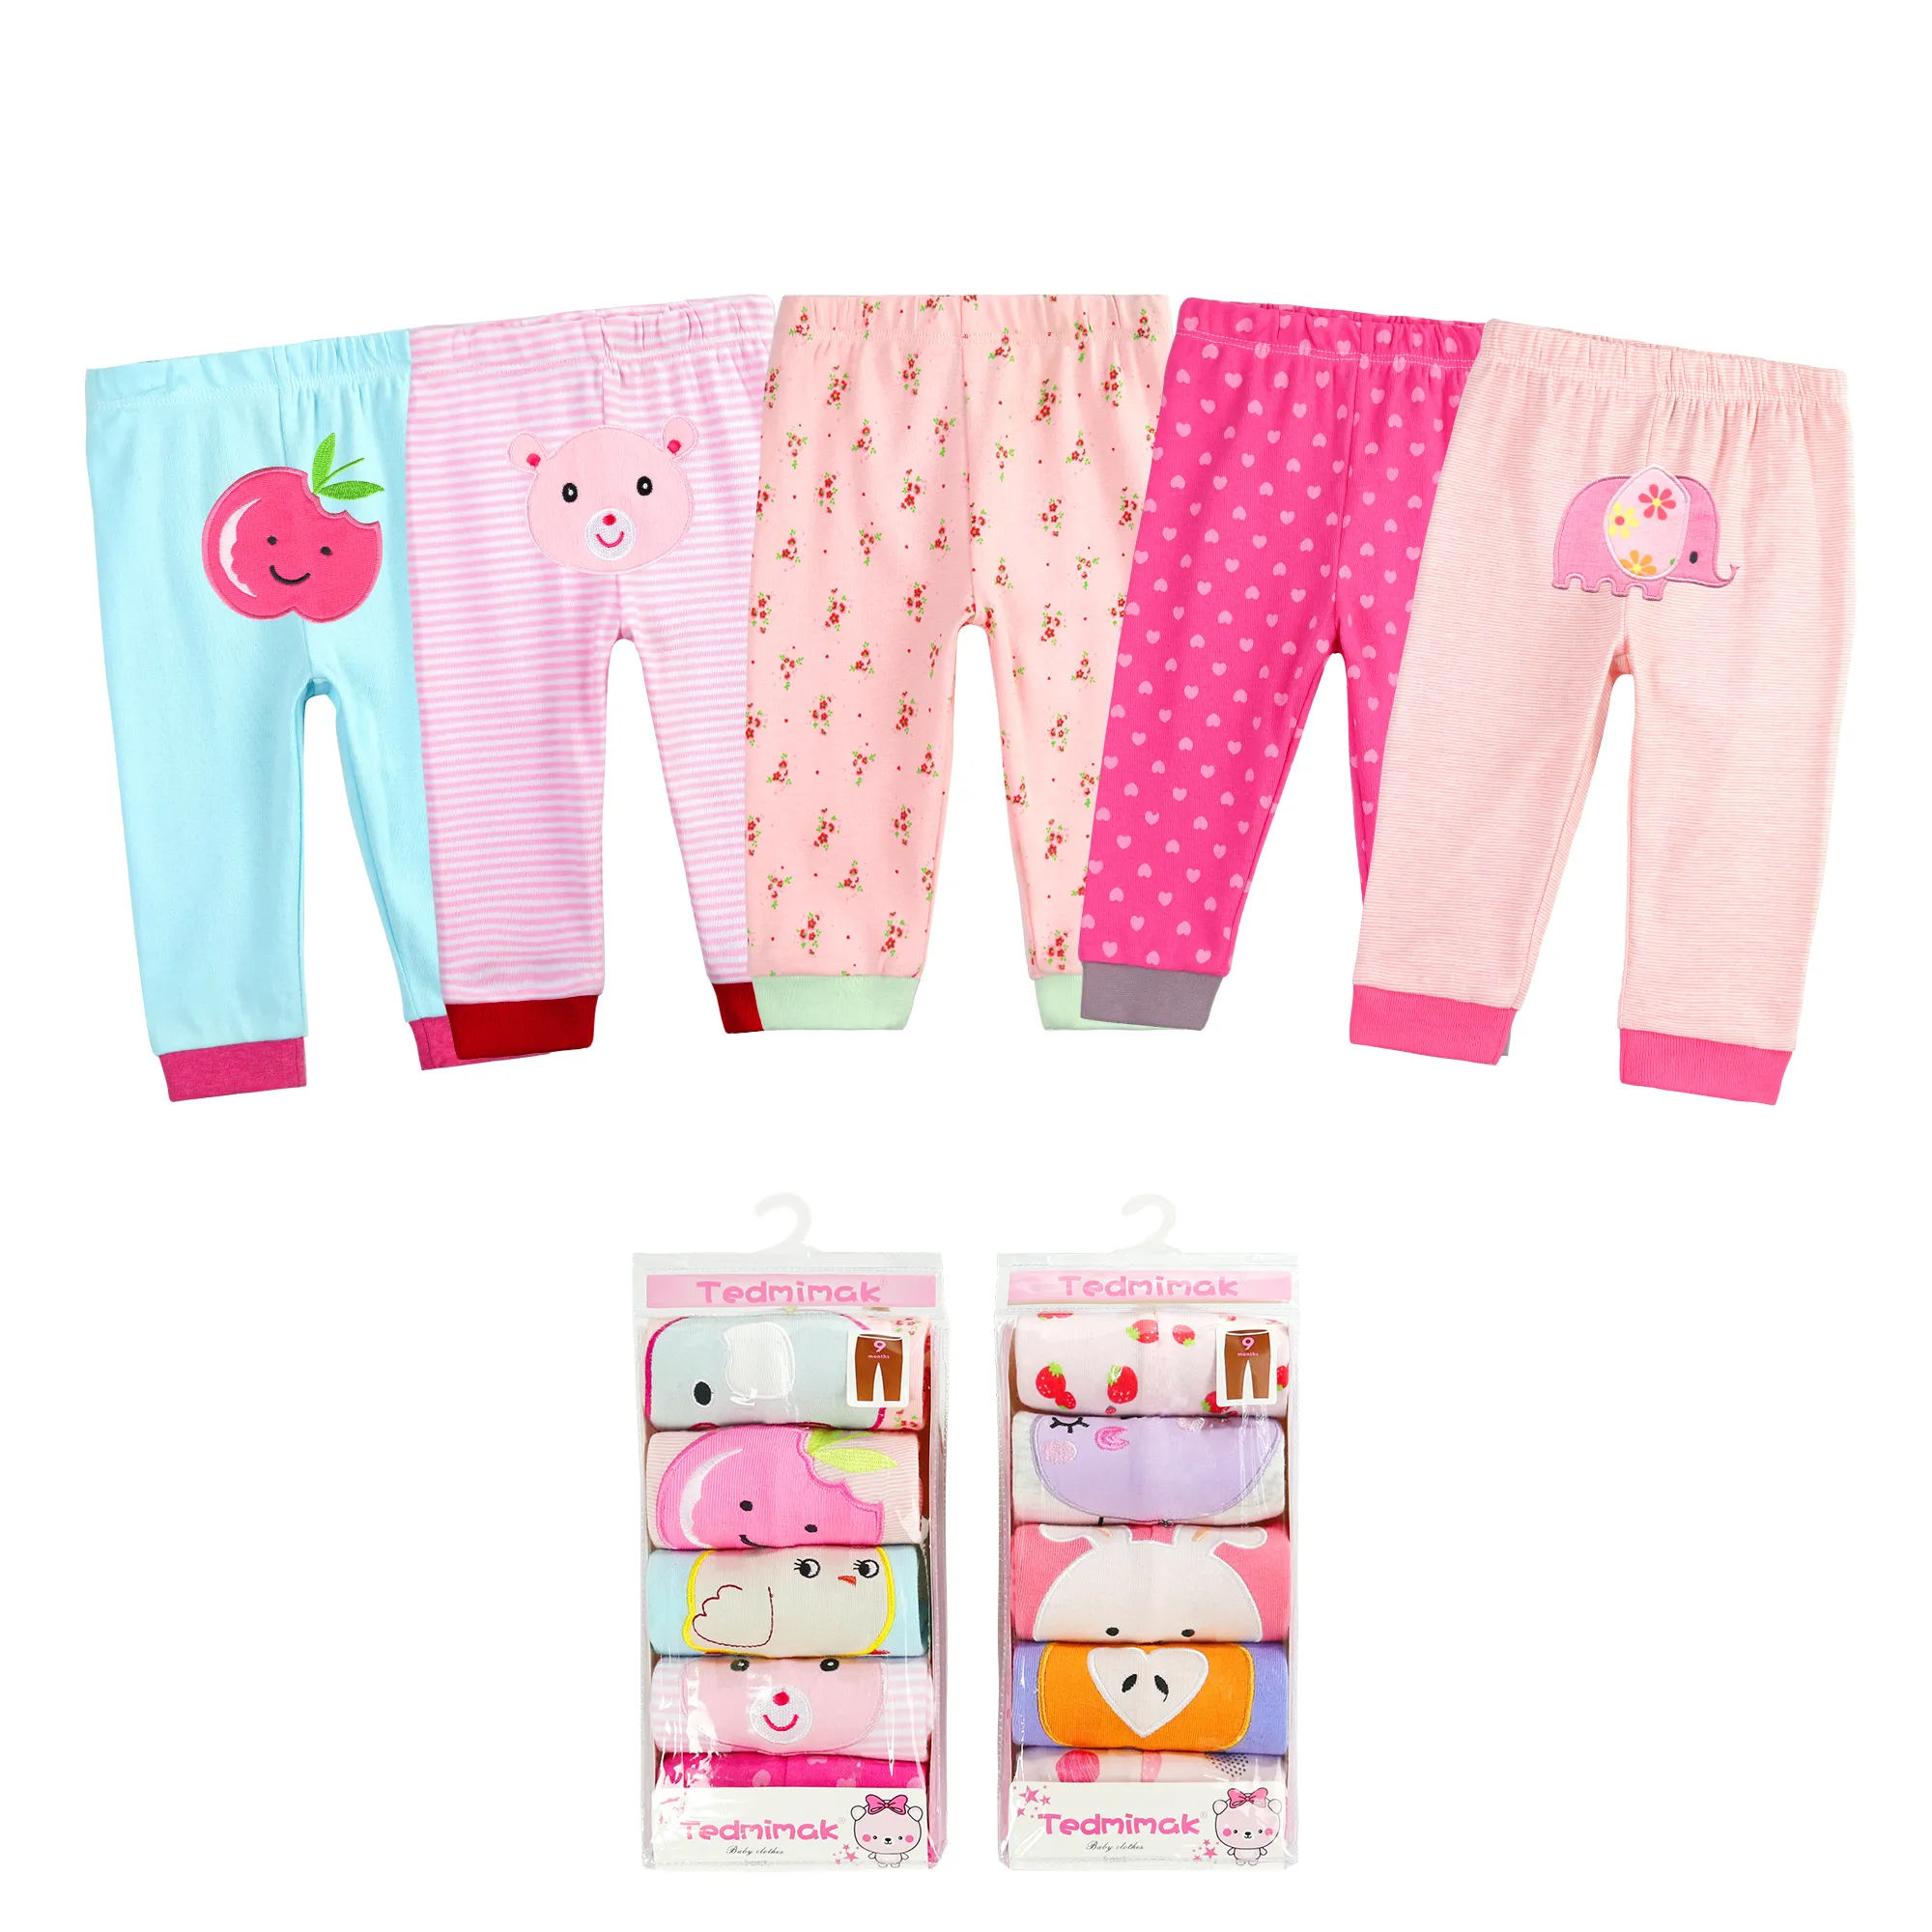 Wholesale Baby clothes Gift sets 5 Pcs Newborn Infants Trousers for Girl Boy Print Embroidery Cartoon 100% Cotton Baby Pants